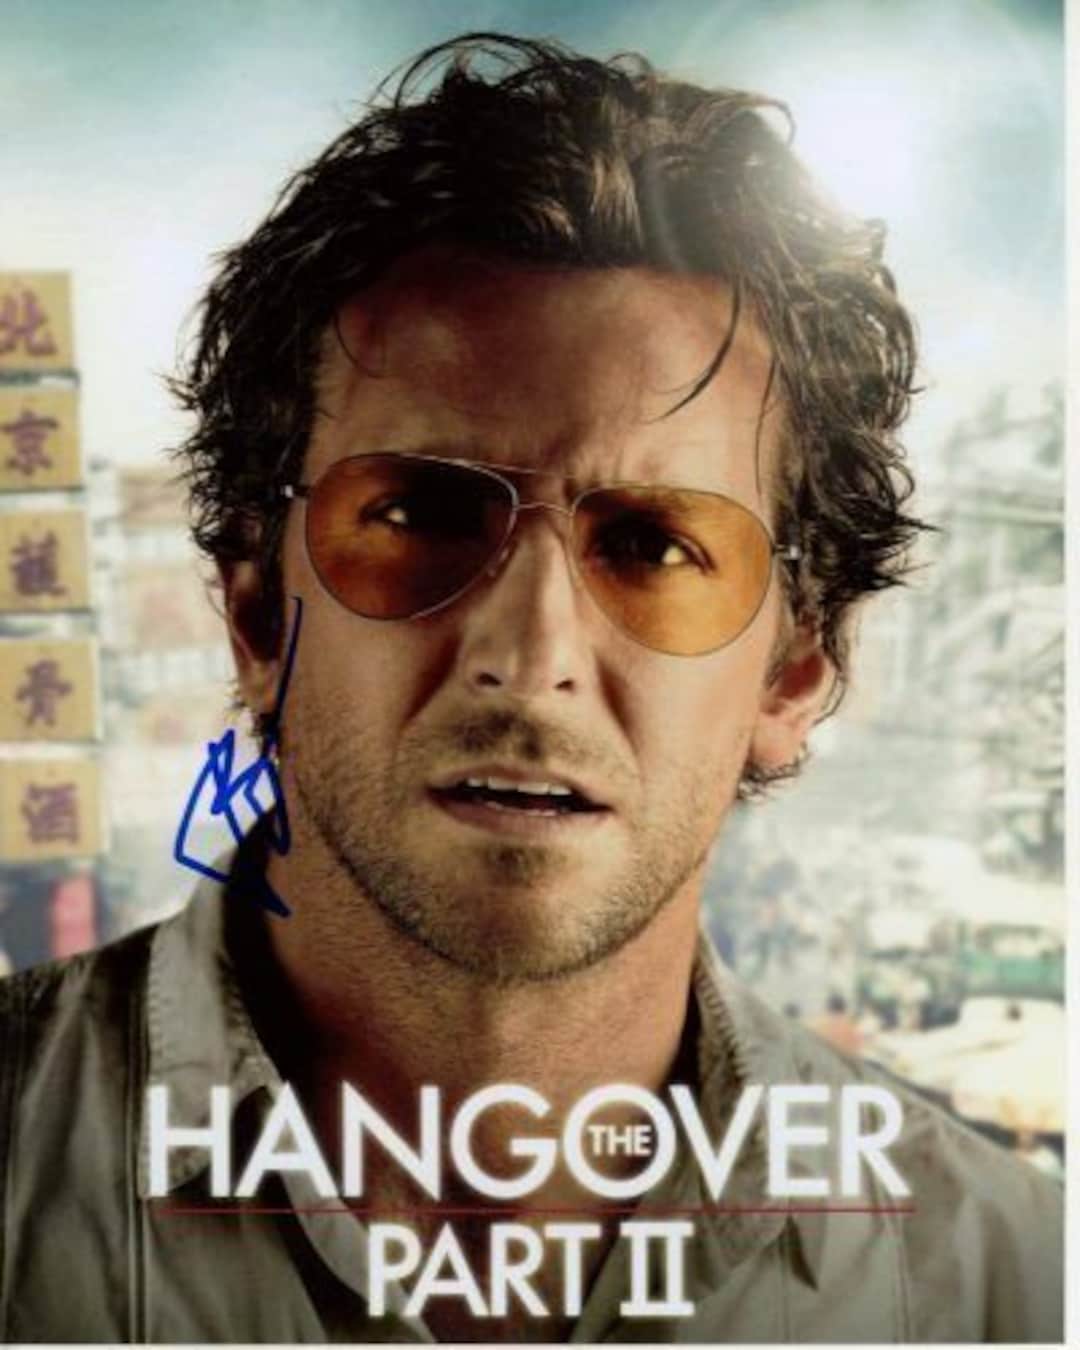 The Hangover: Part 2: Bradley Cooper and the boys reunite in